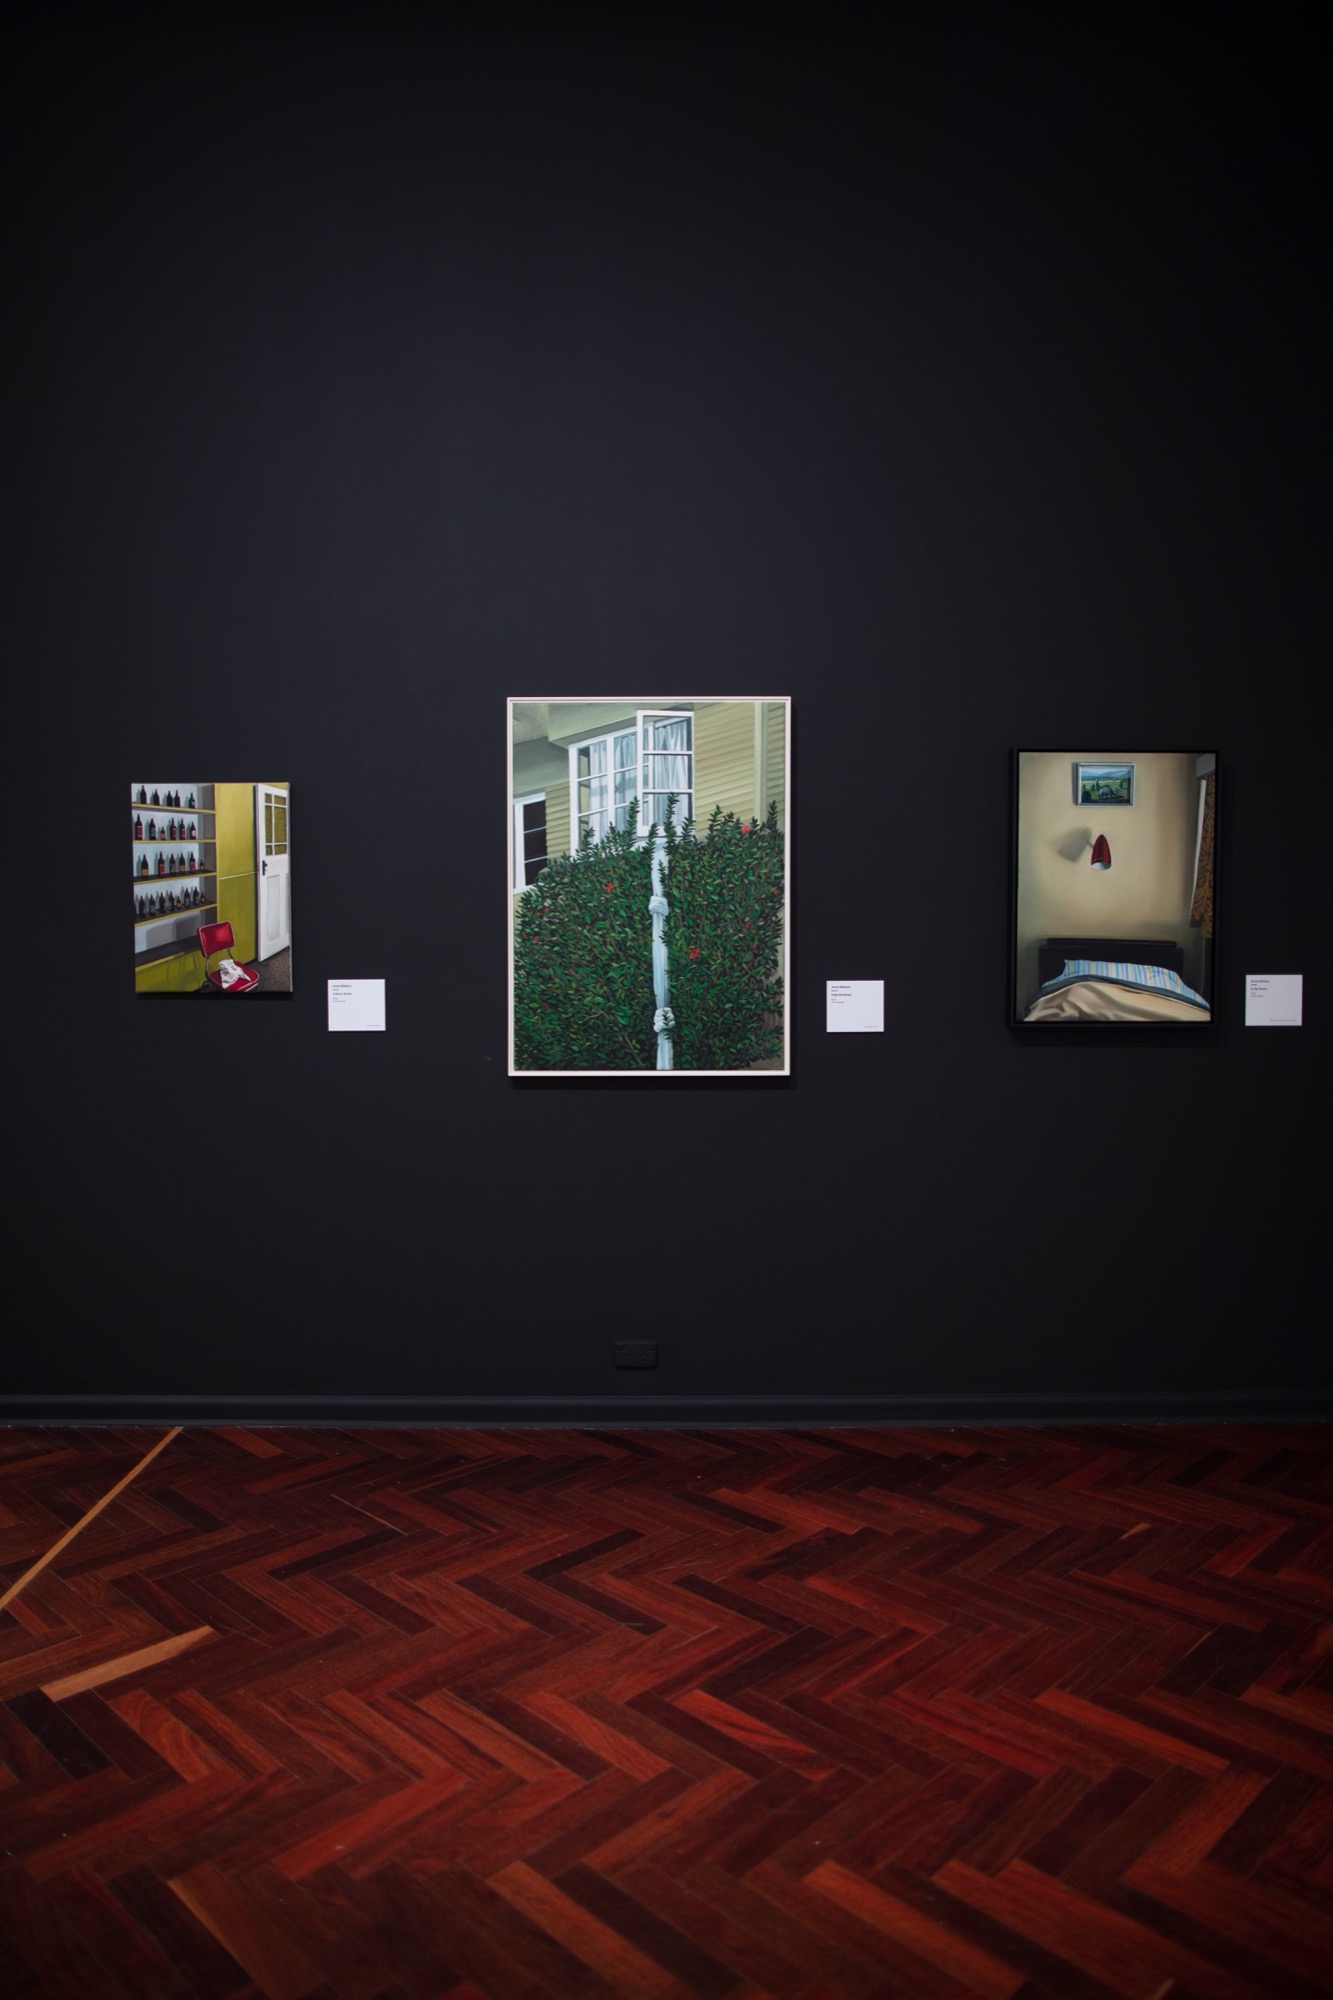 (left to right) Anne Wallace, Vulture Street, 2003. Oil on canvas, 57 x 43cm; Anne Wallace, In My Room, 2007. Oil on canvas, 73 x 54cm; Anne Wallace, High Windows, 2010. Oil on canvas, 100 x 74cm. Courtesy of the Art Gallery of Ballarat.